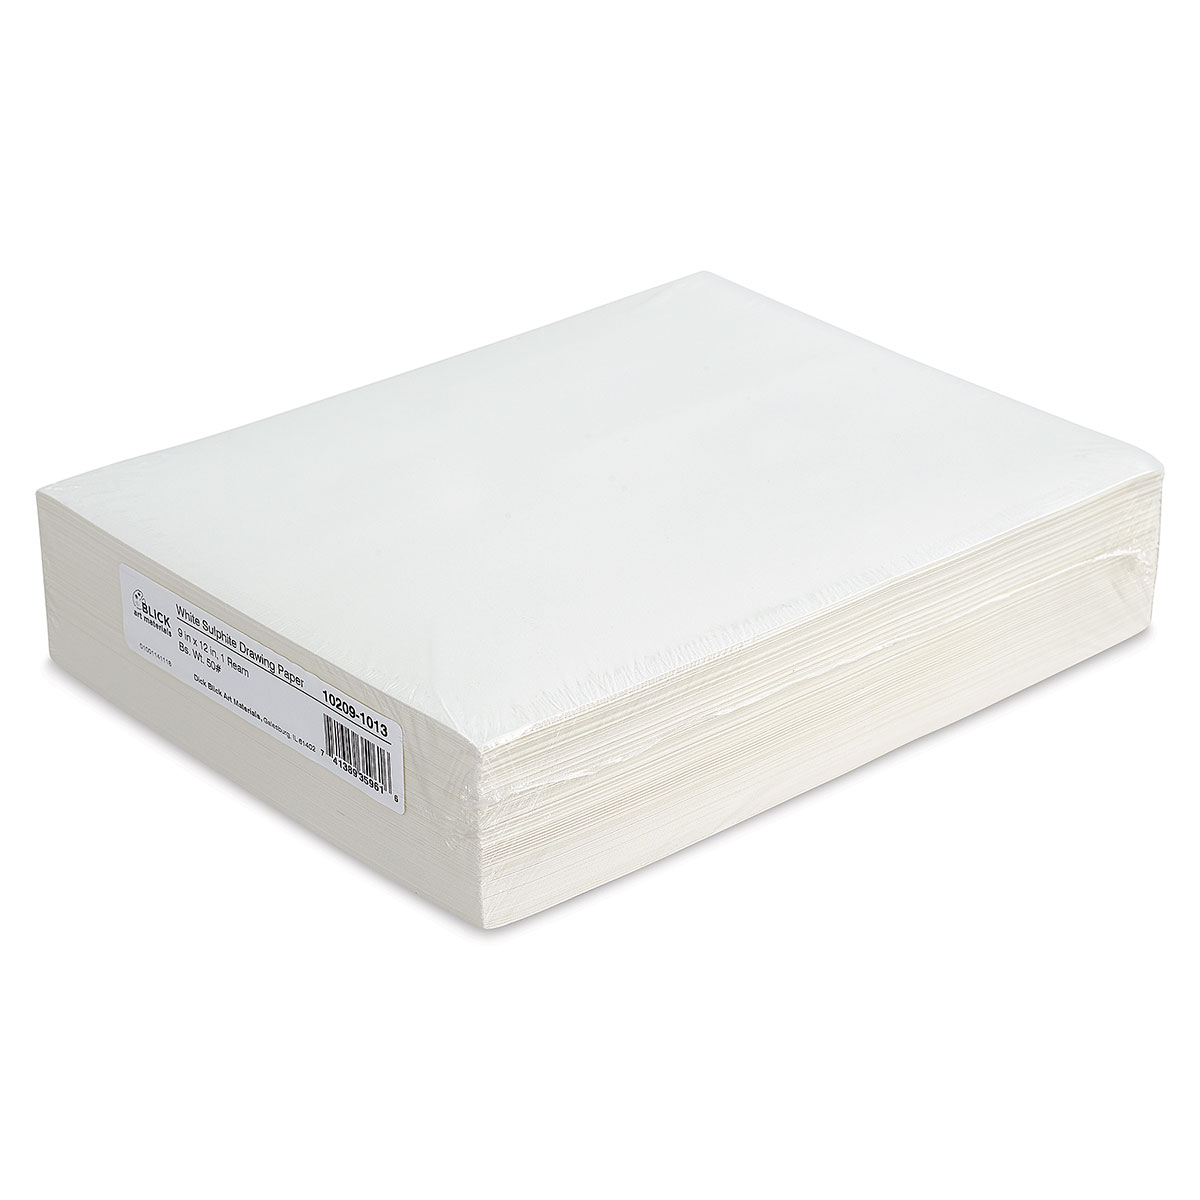 Blick Sulphite Drawing Papers 9" x 12", White, 500 Sheets, 50 lb